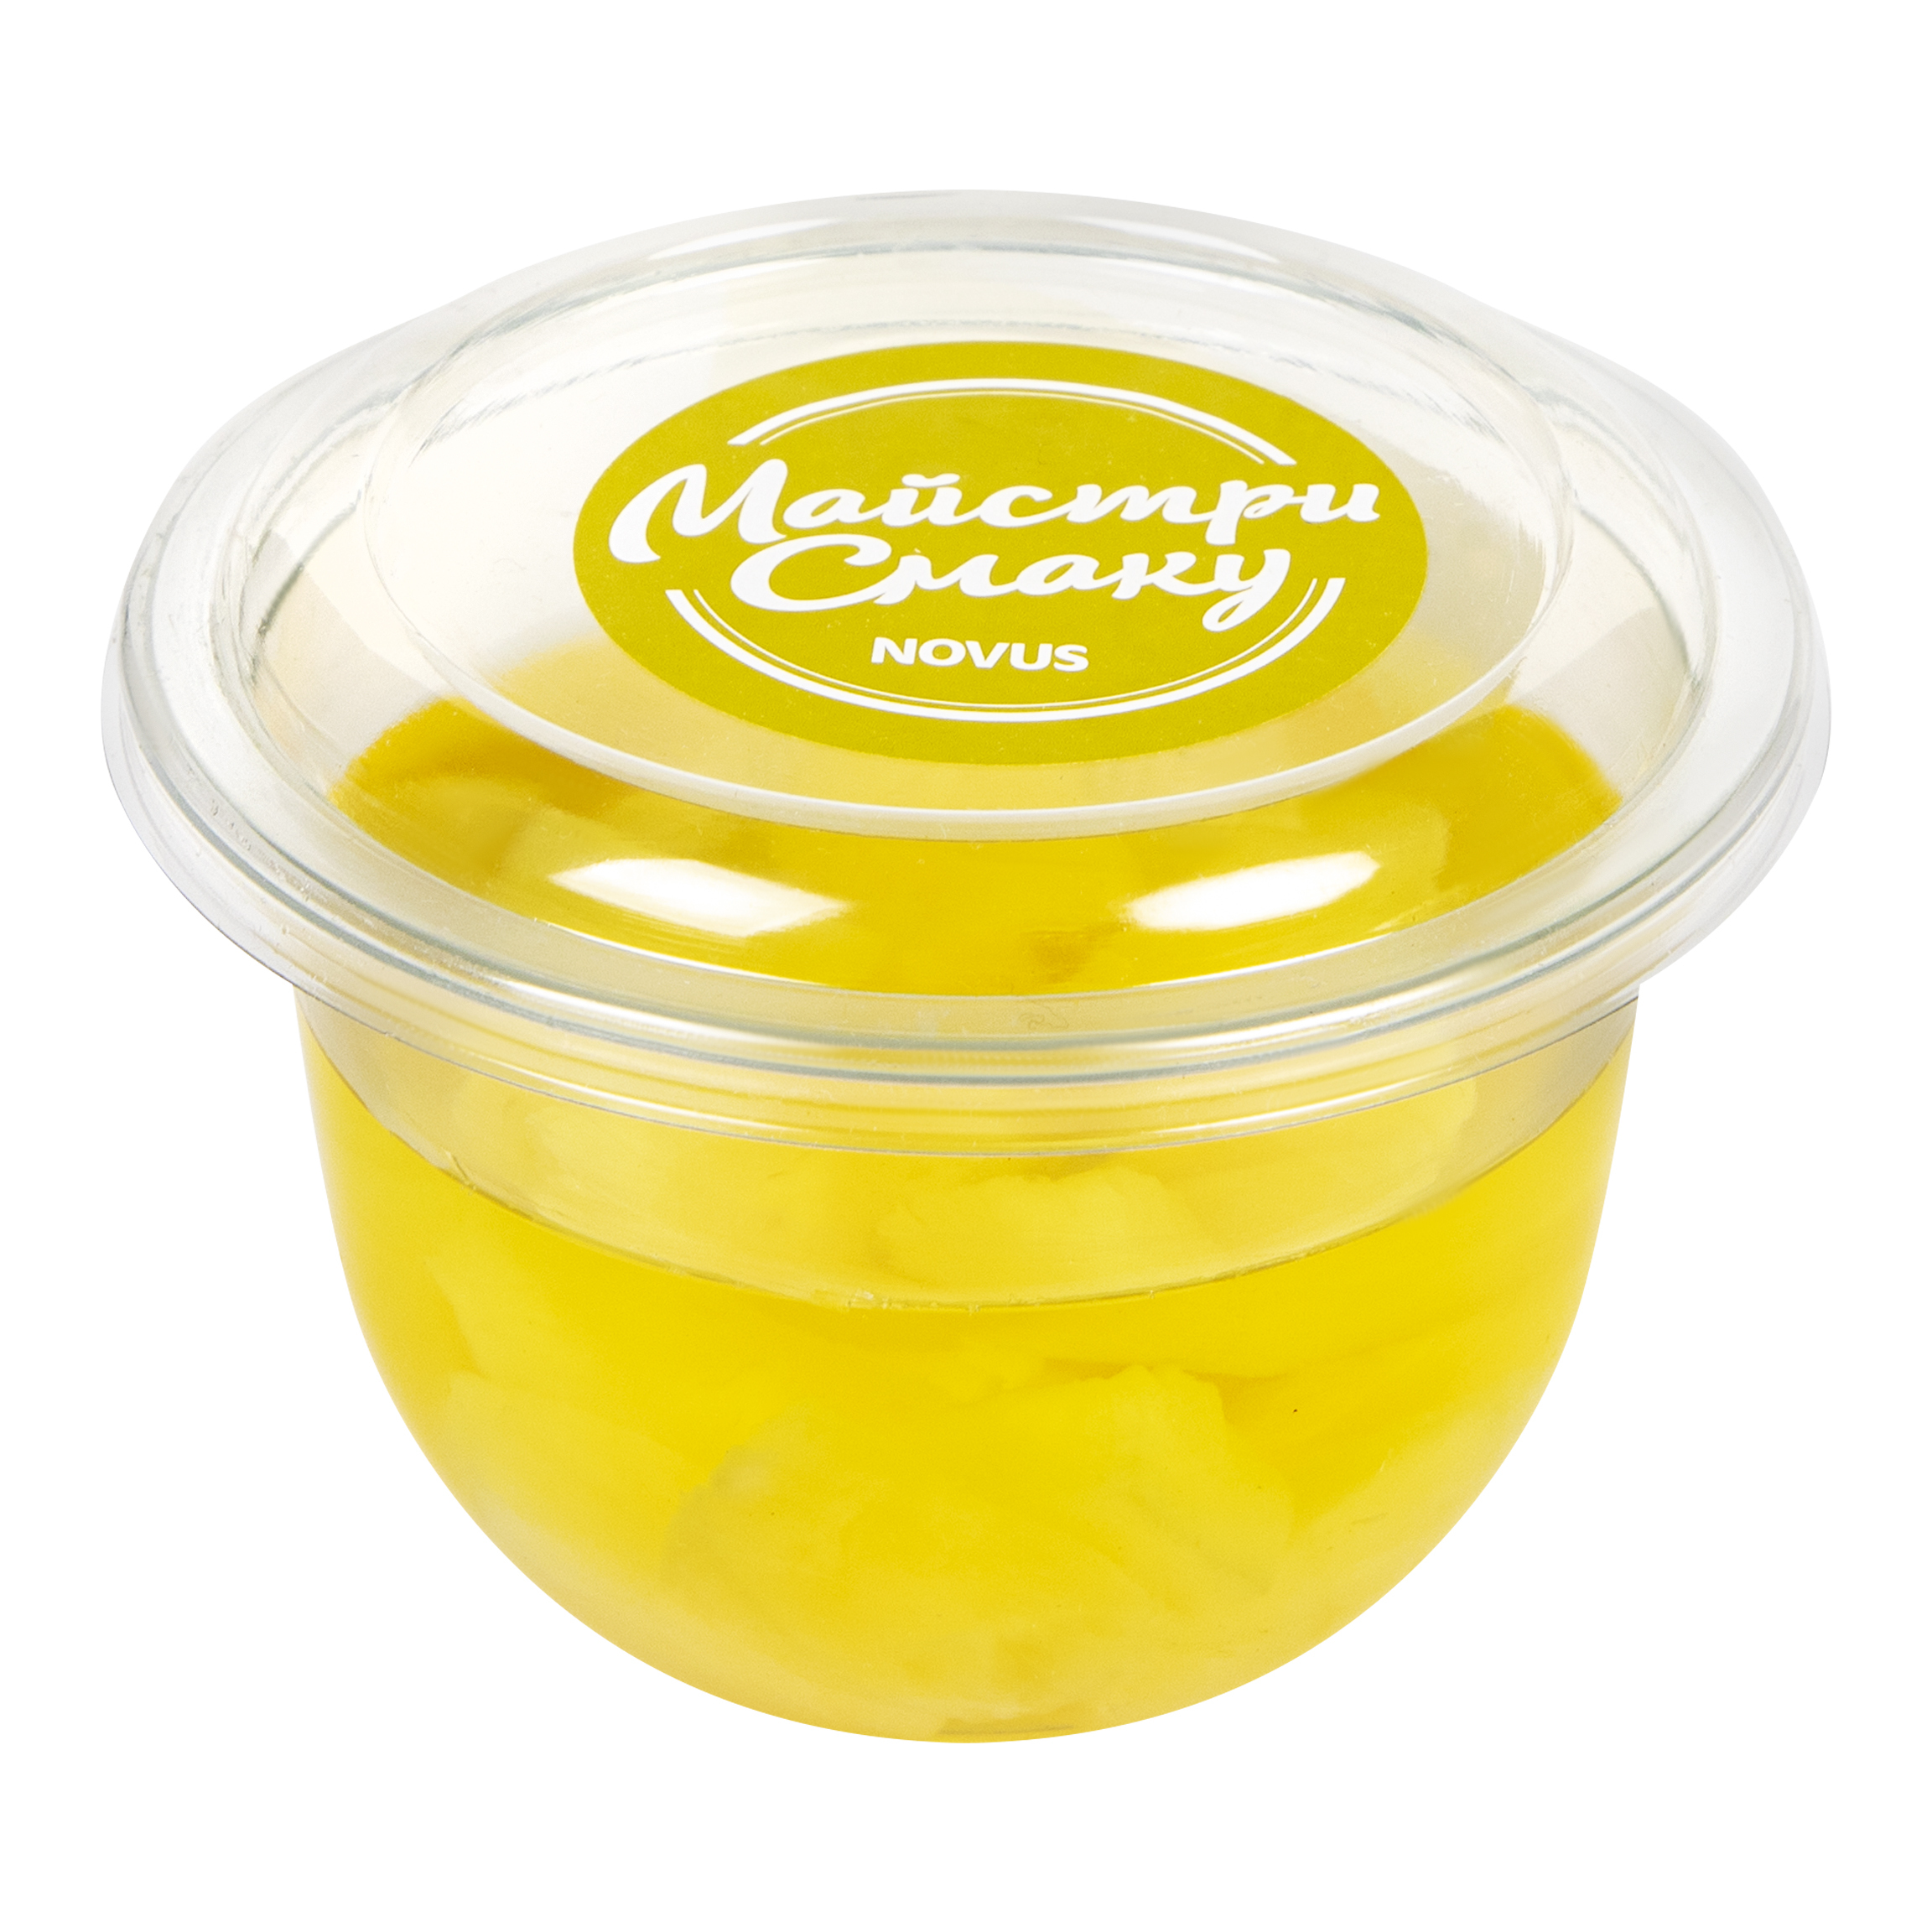 With Pineapple Jelly 200g